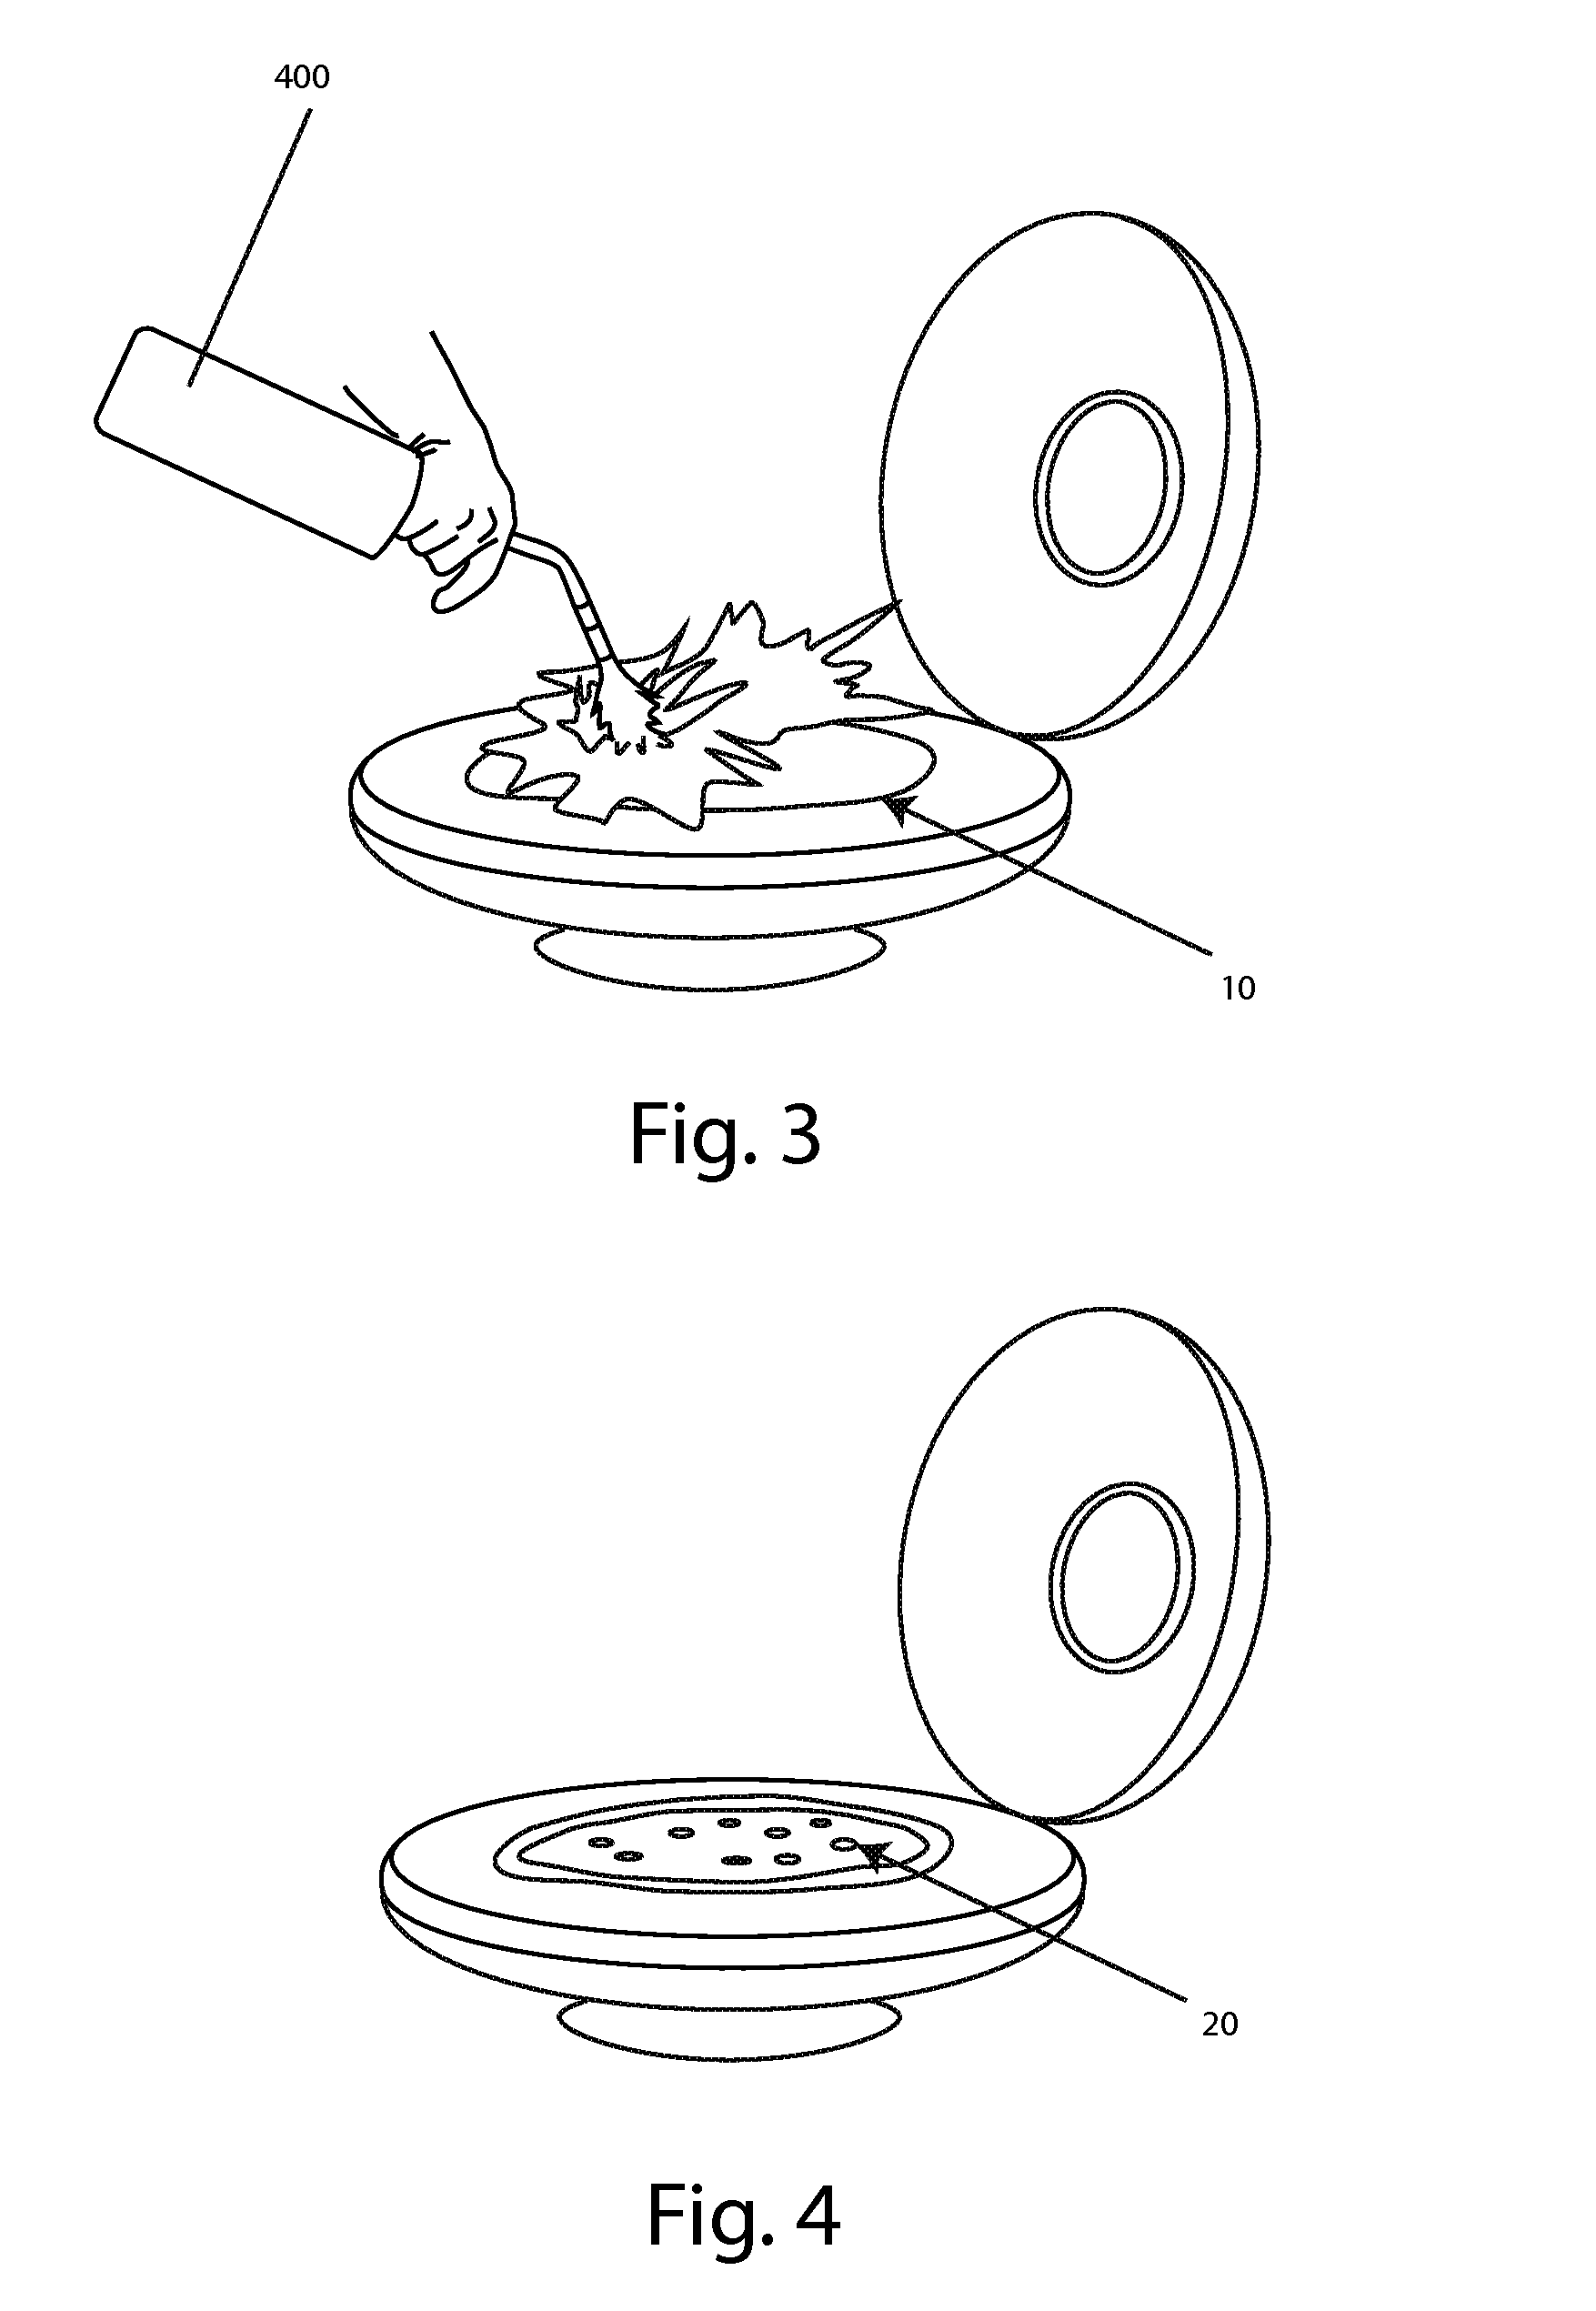 Method and Apparatus for Cooking Pizza